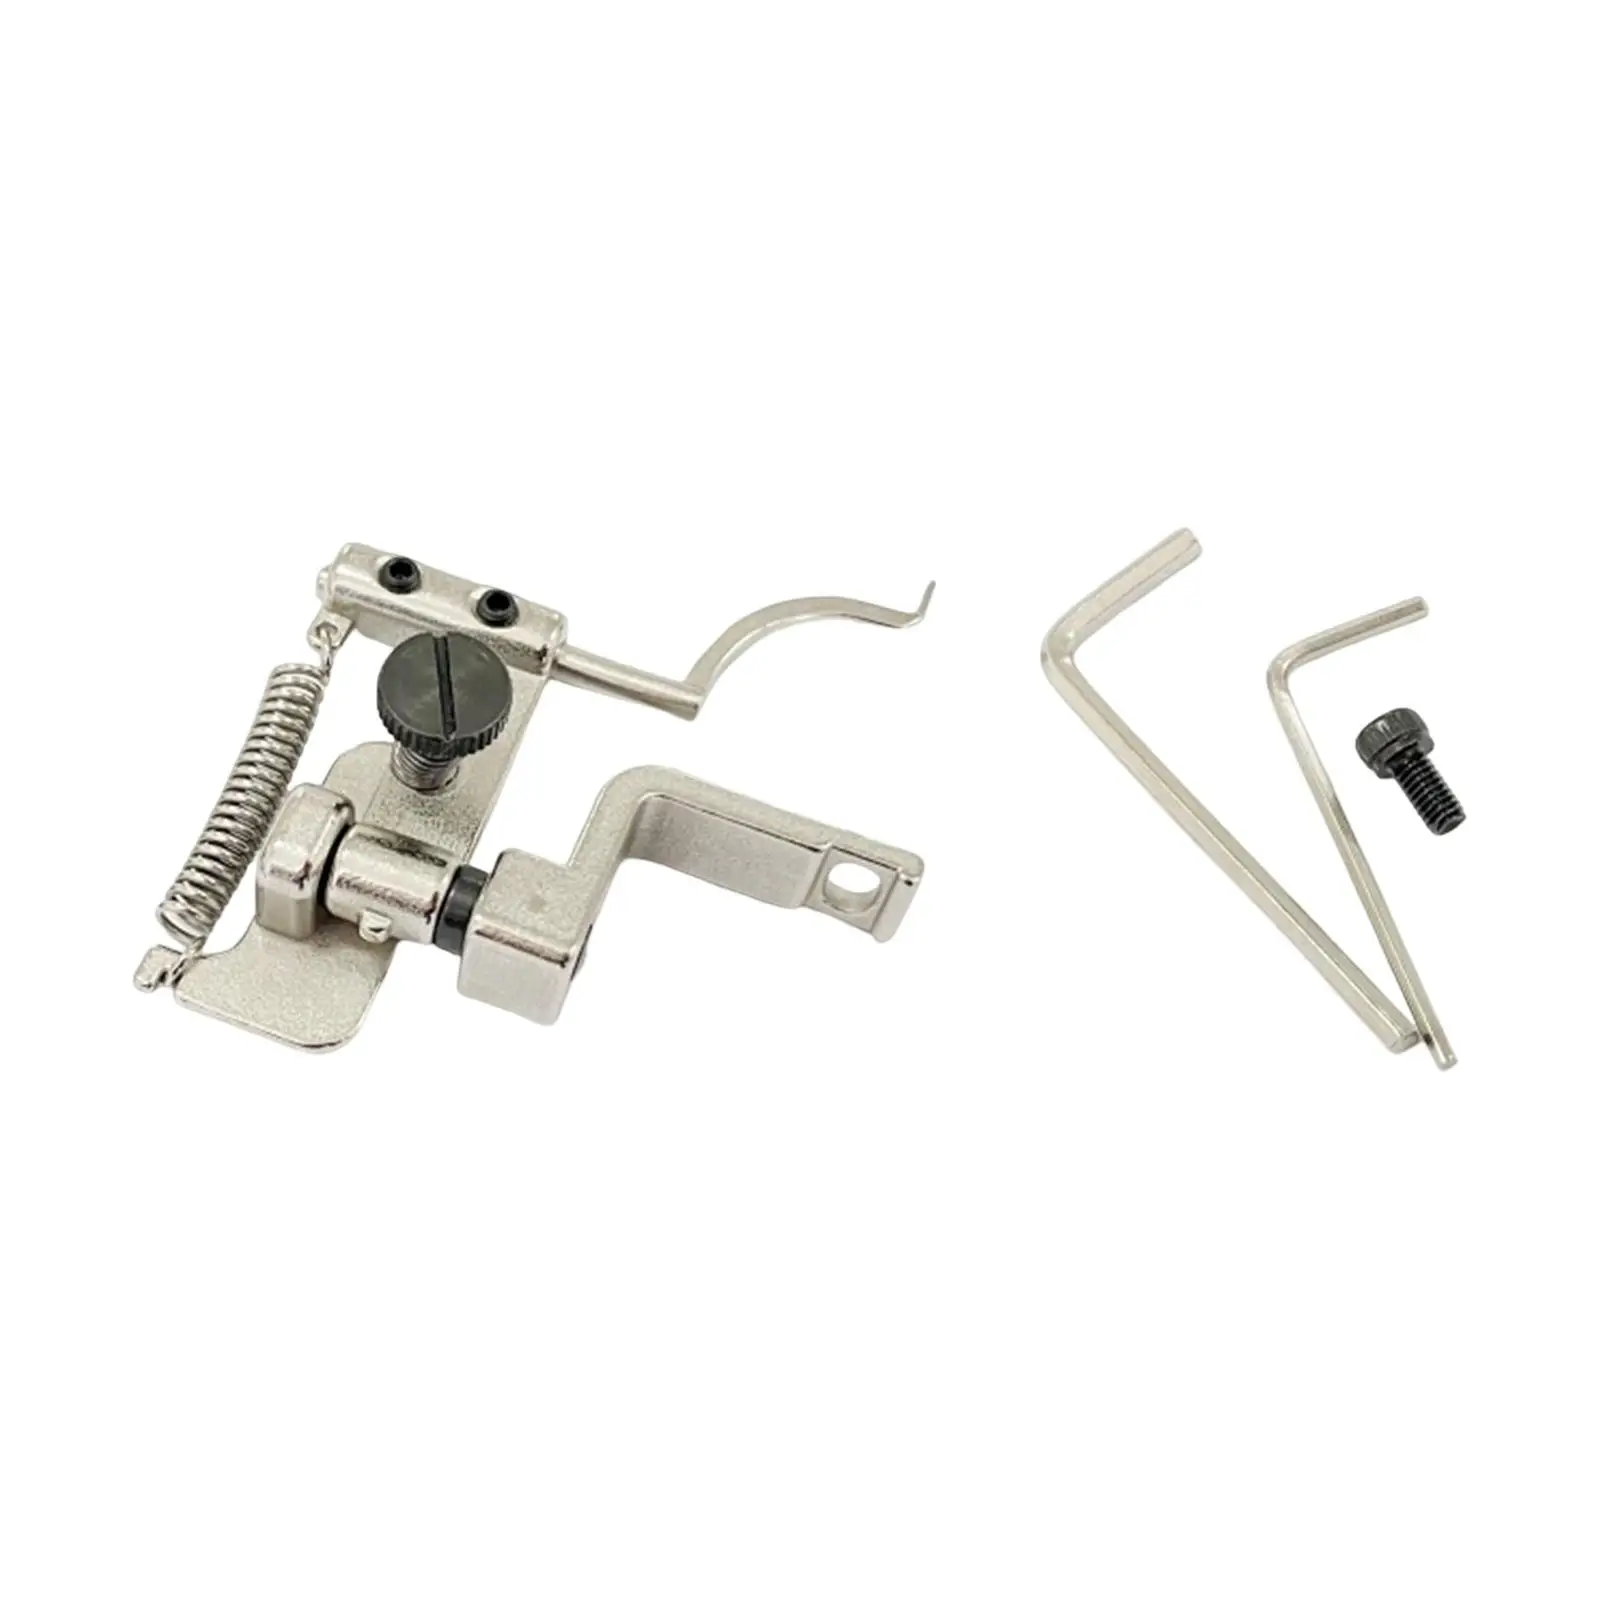 Suspended Edge Guide Sewing Machine Accessories Universal Accessories Parts Hem Guide for Sewing Quilting 591 891 Beginners